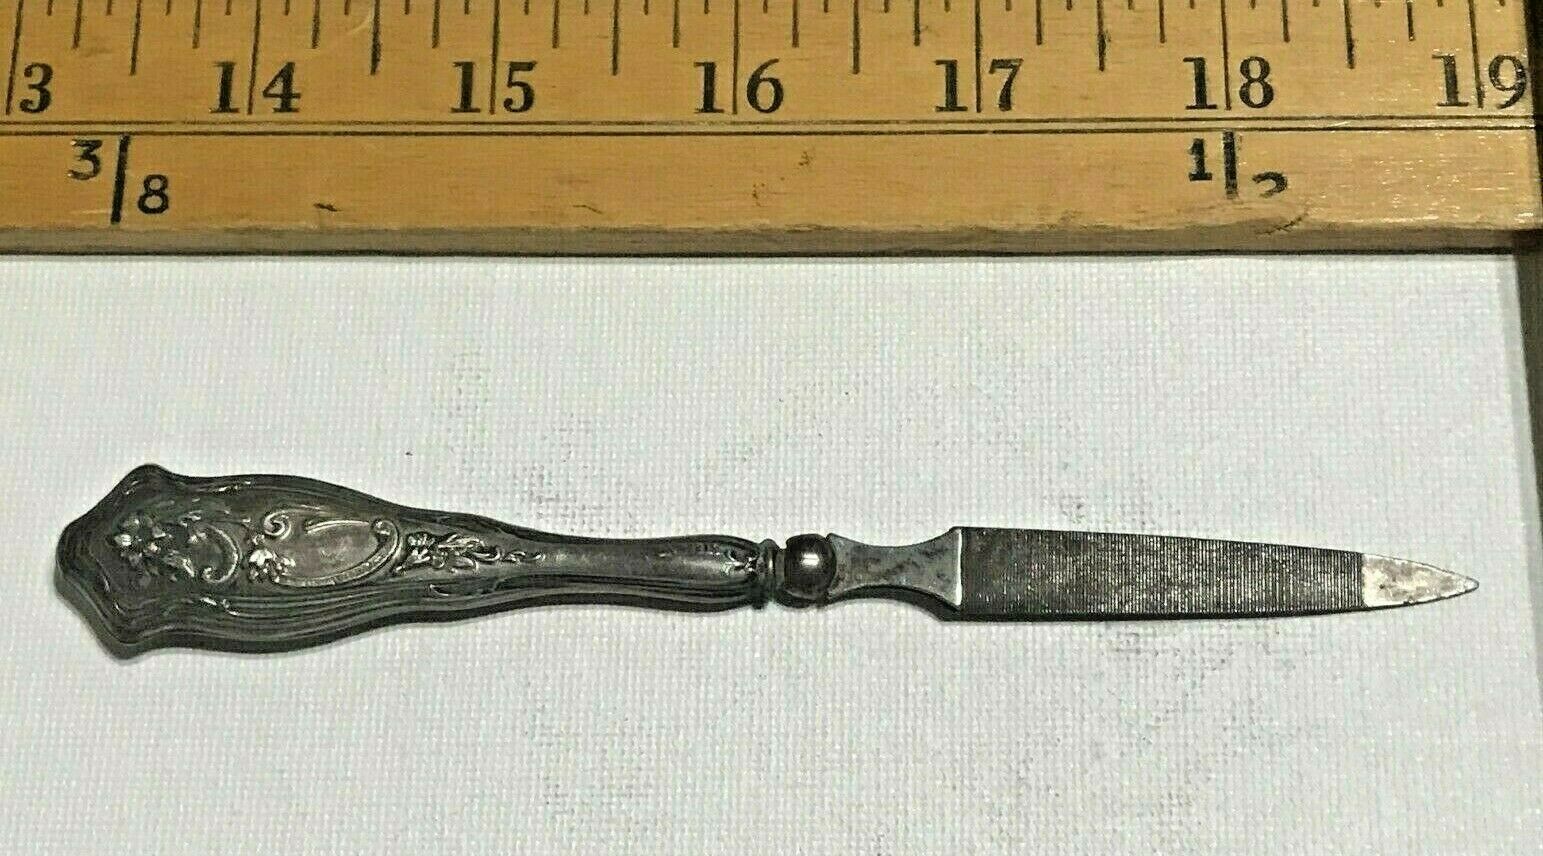 Primary image for ANTIQUE VICTORIAN ART NOUVEAU NAIL FILE ORNATE STERLING SILVER FLORAL DESIGN